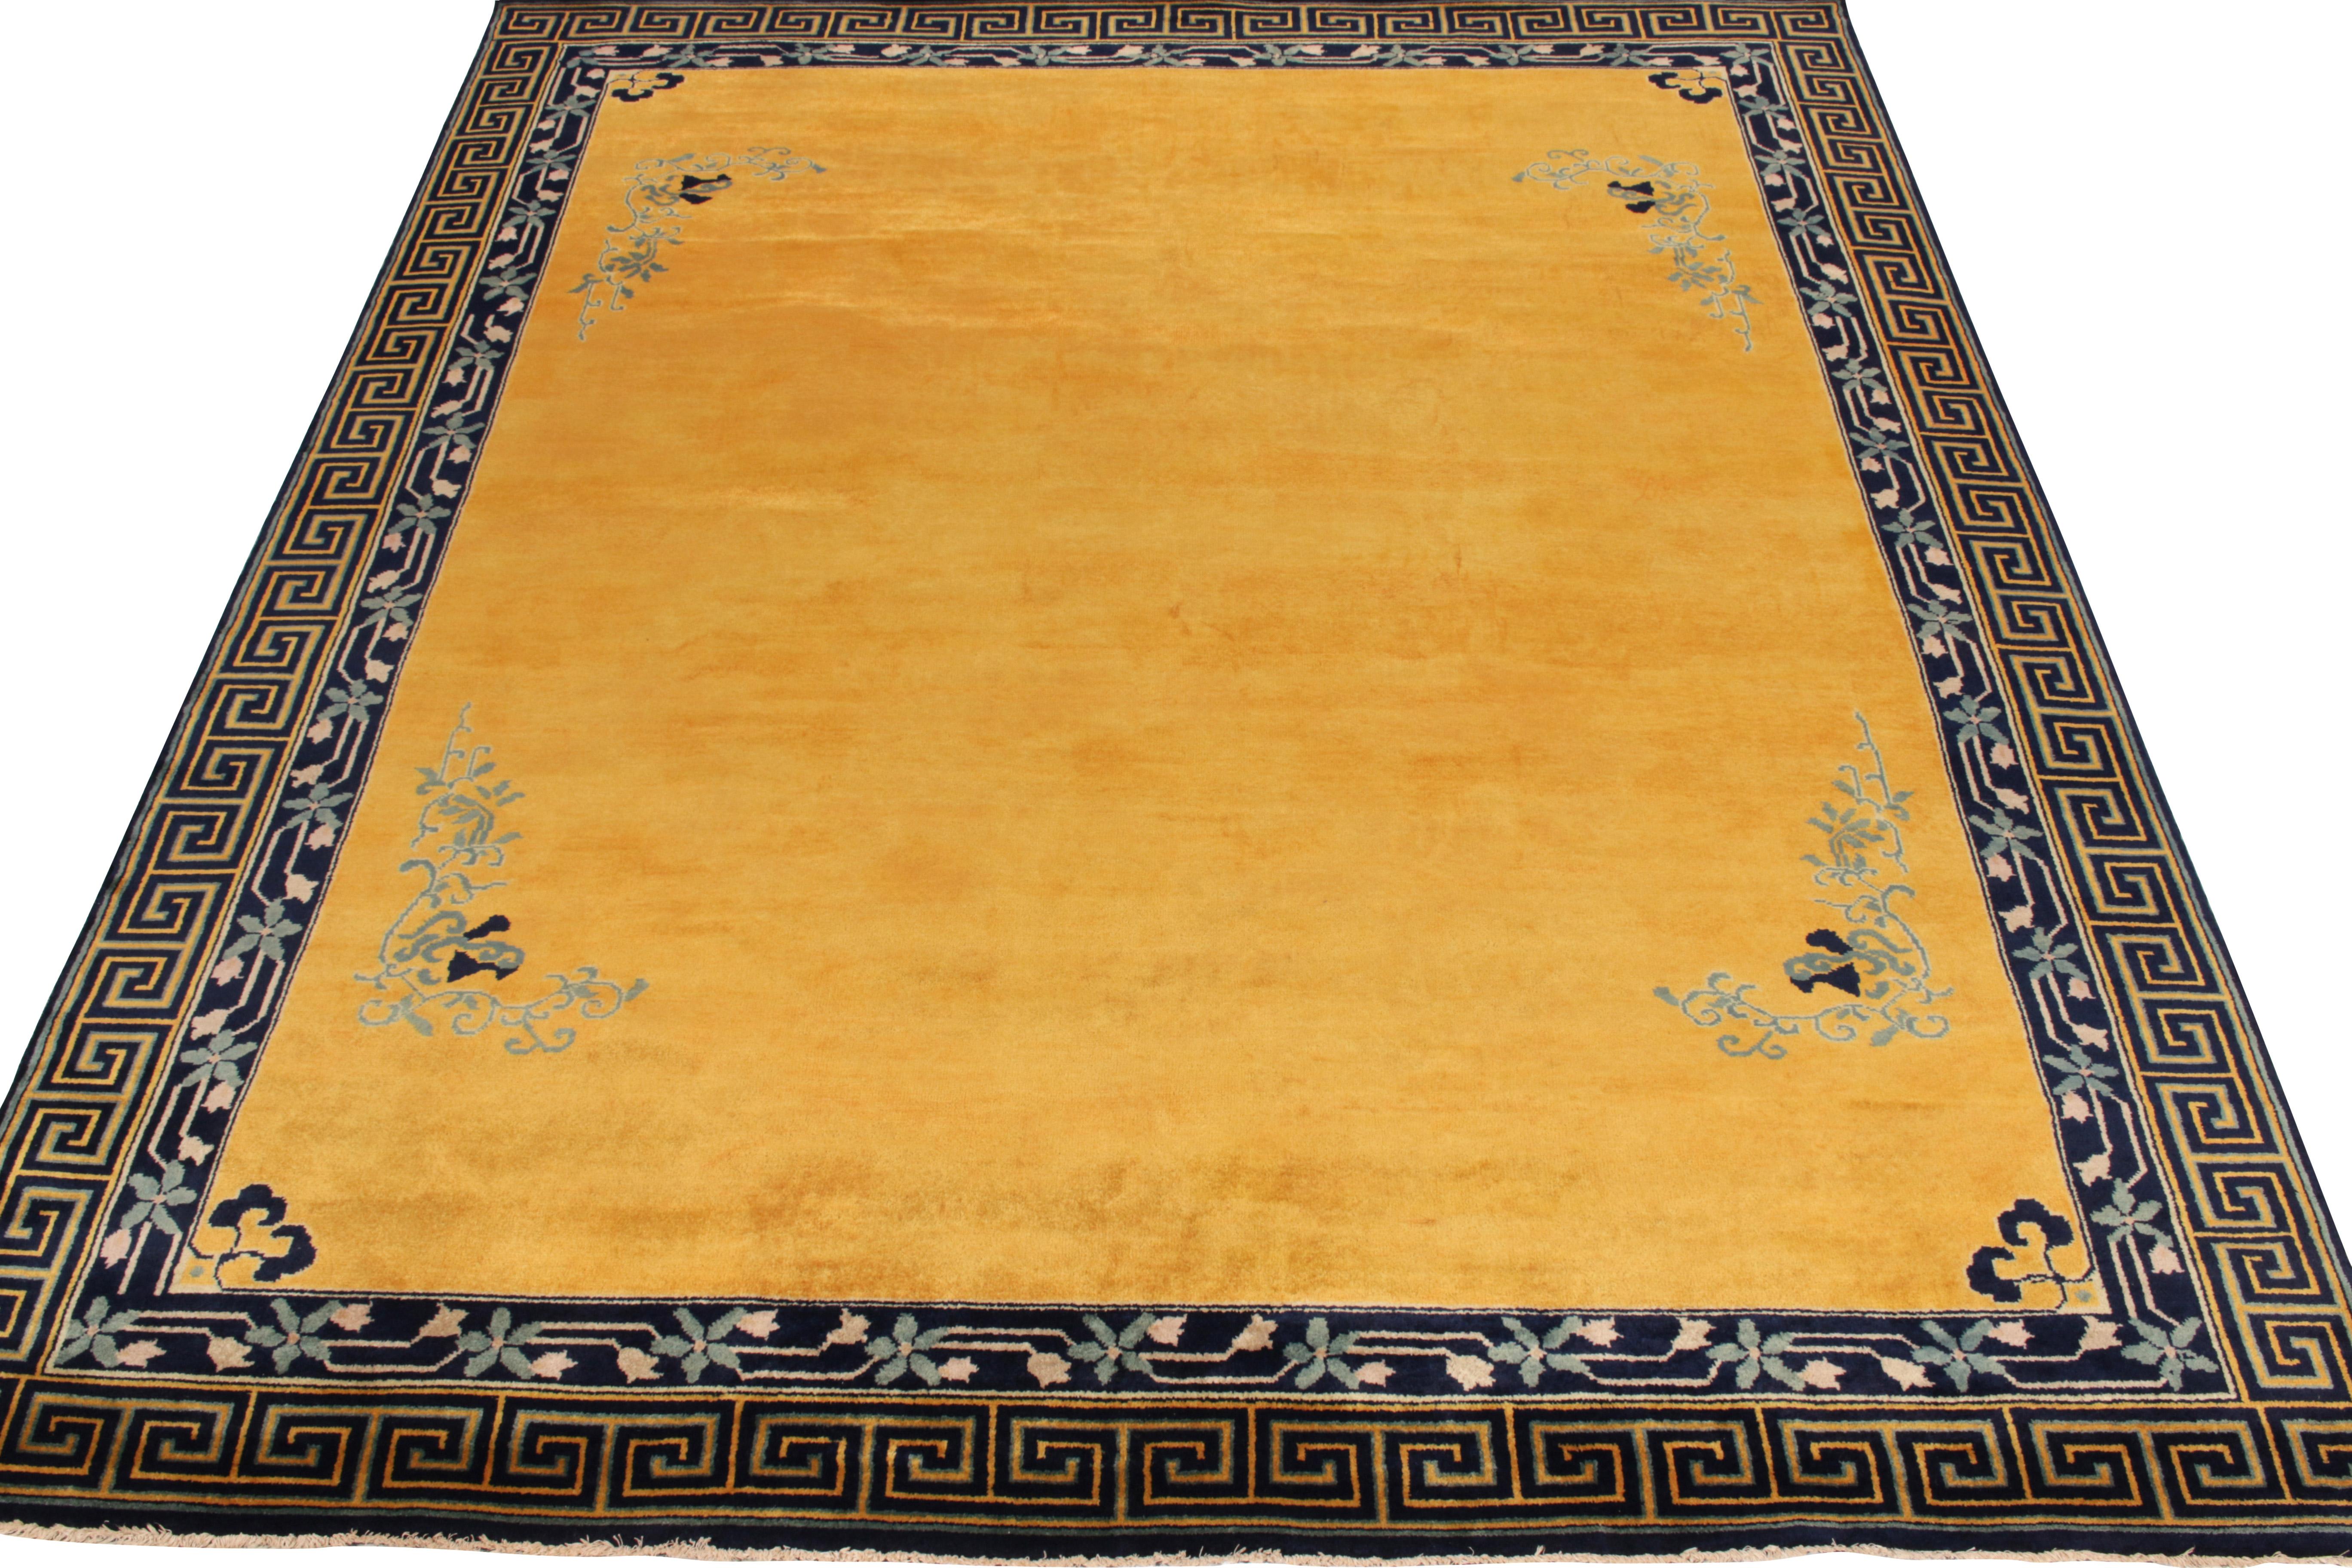 Encased in a fretwork Greek Key border & floral designs in deep blue, warm gold & peach, this 1920s style rug enjoys Chinese Art Deco rug inspirations, among a distinctive line of vintage rugs newly unveiled from Rug & Kilim. The lush, hand-knotted